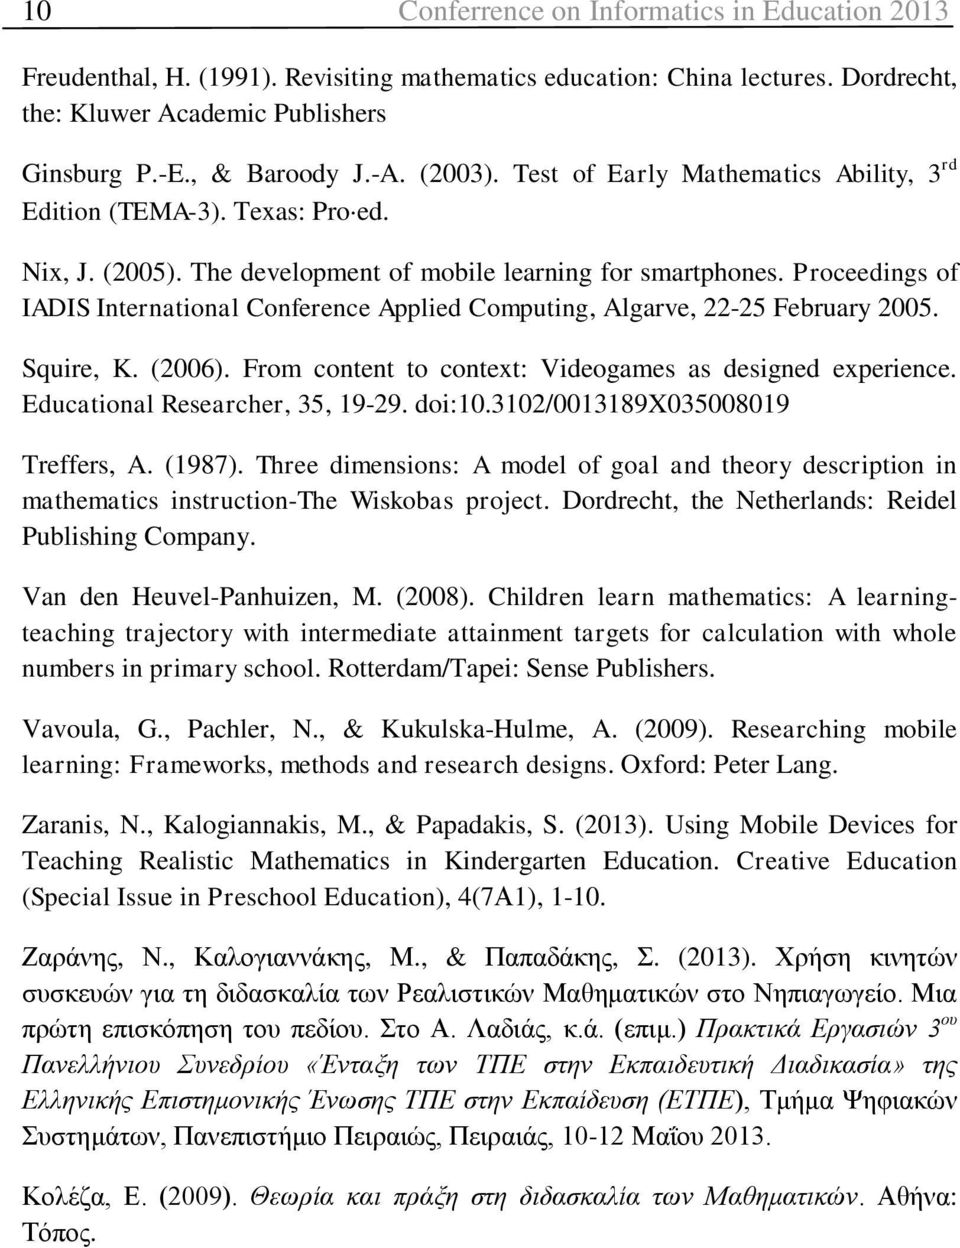 Proceedings of IADIS International Conference Applied Computing, Algarve, 22-25 February 2005. Squire, K. (2006). From content to context: Videogames as designed experience.